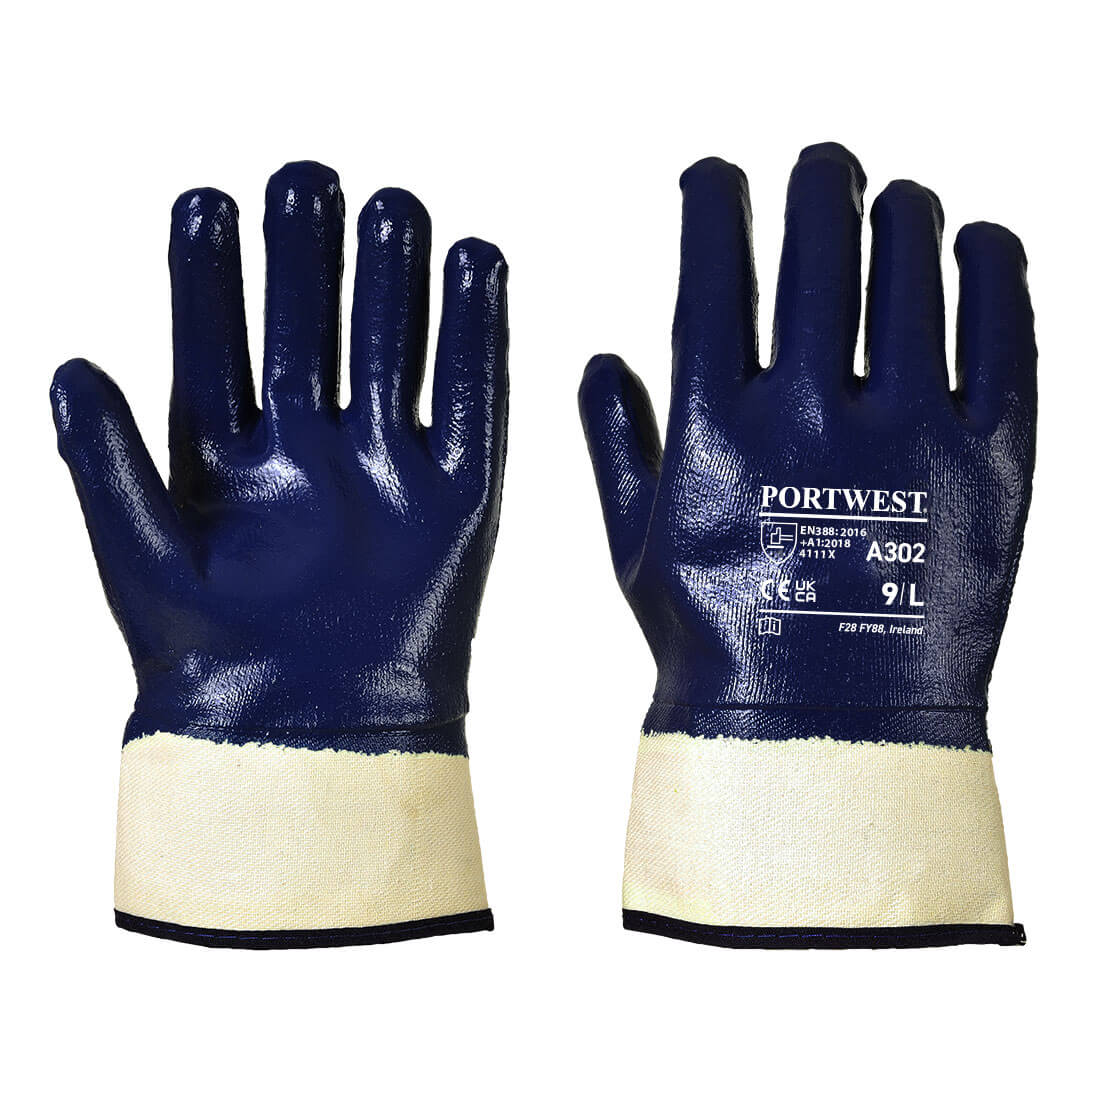 Fully Dipped Nitrile Safety Cuff Re-usable Gloves A302